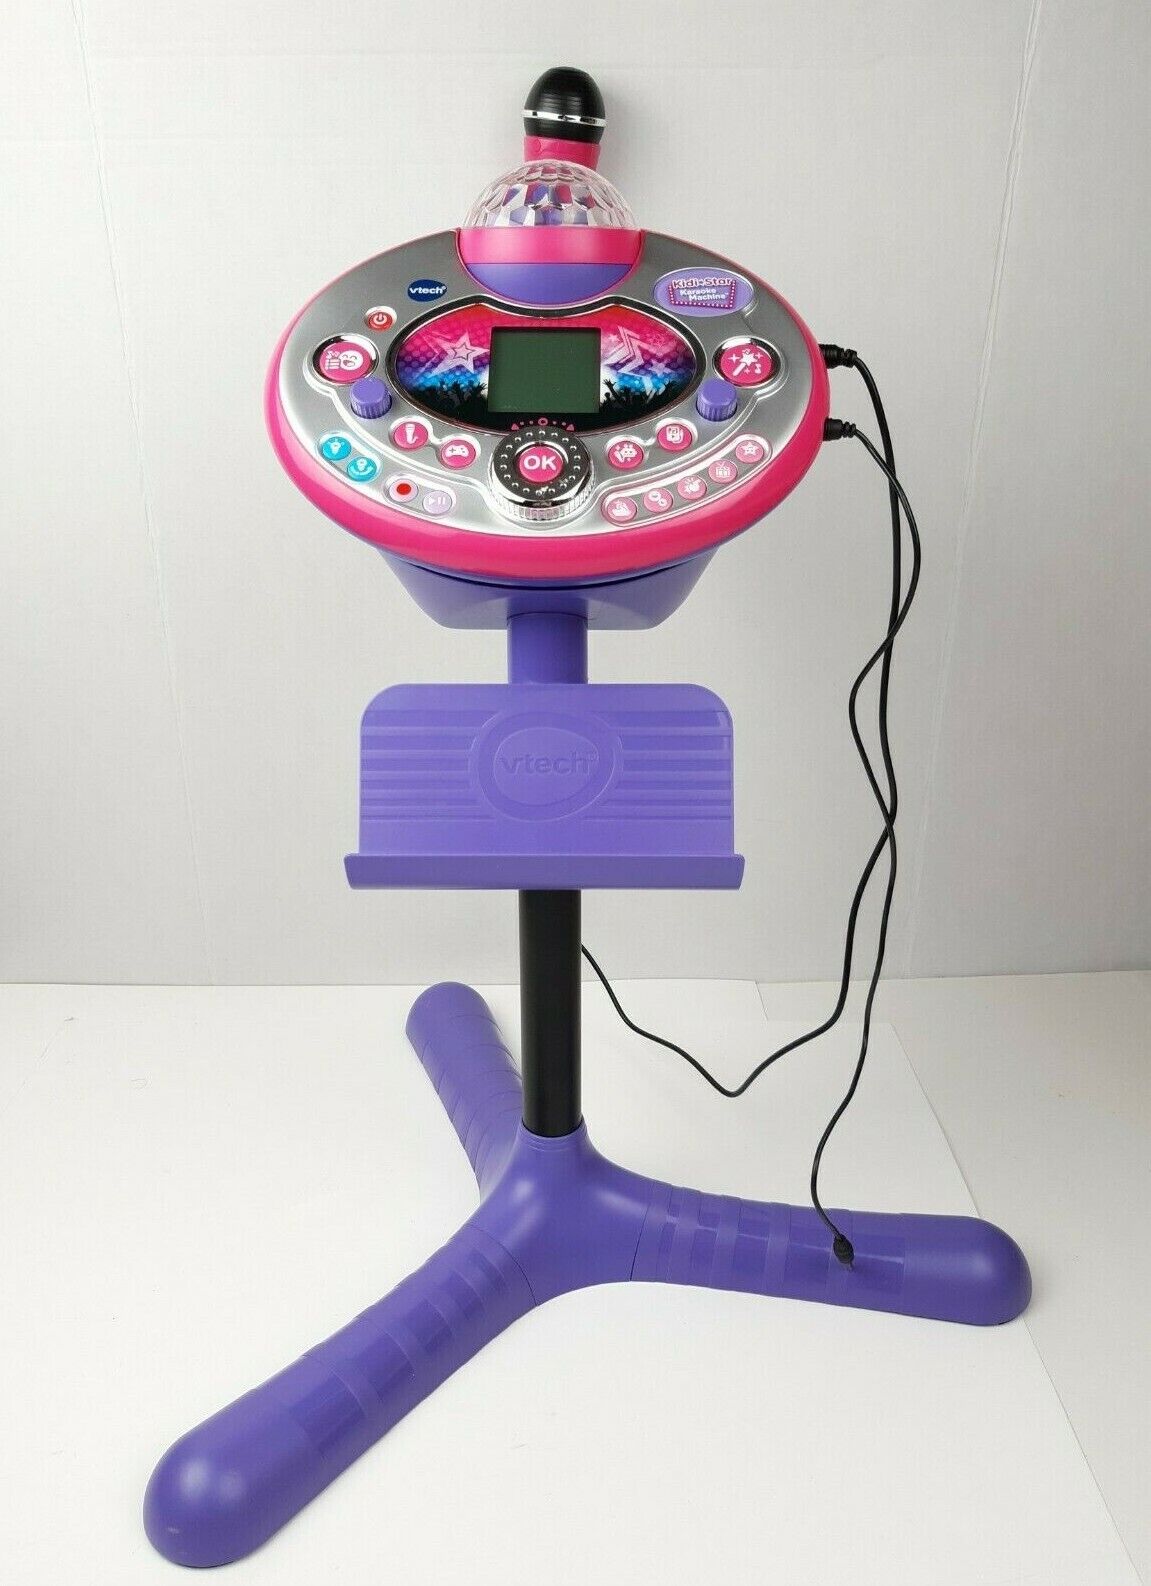 VTech Kidi Star Karaoke Machine Connects To MP3 Mobile Devices